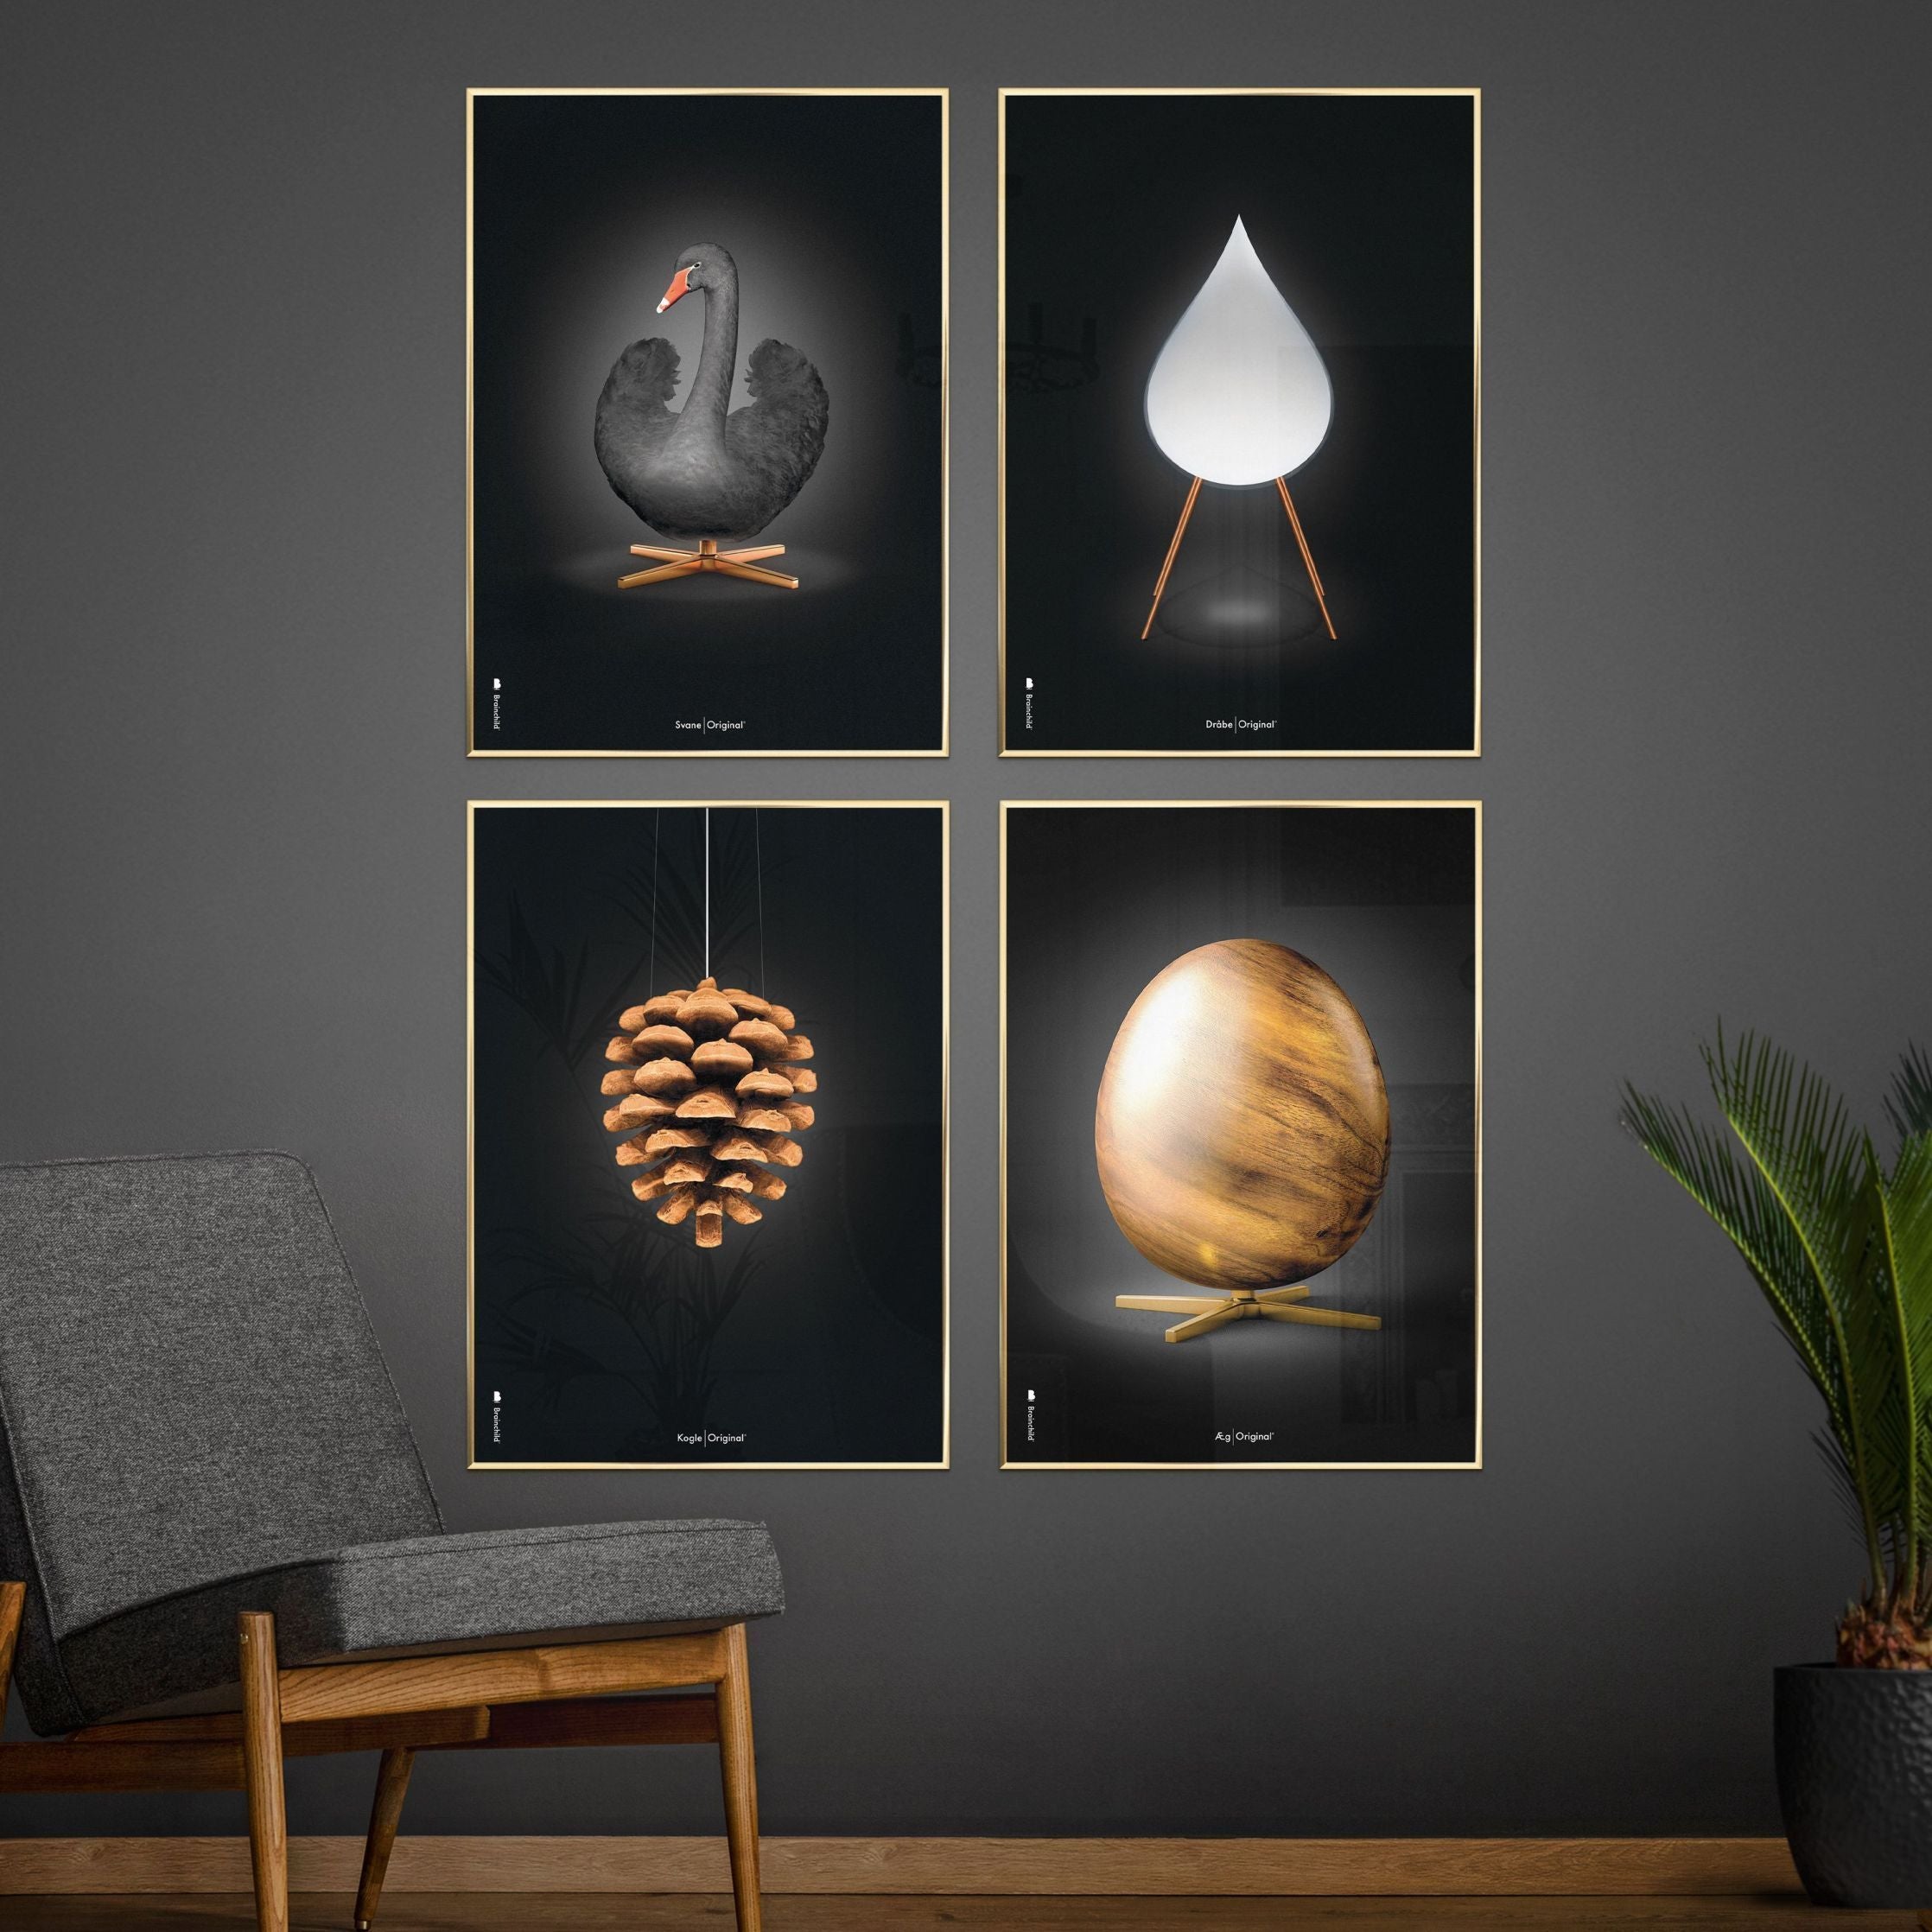 Brainchild Swan Classic Poster, Frame In Black Lacquered Wood 50x70 Cm, Black/Black Background